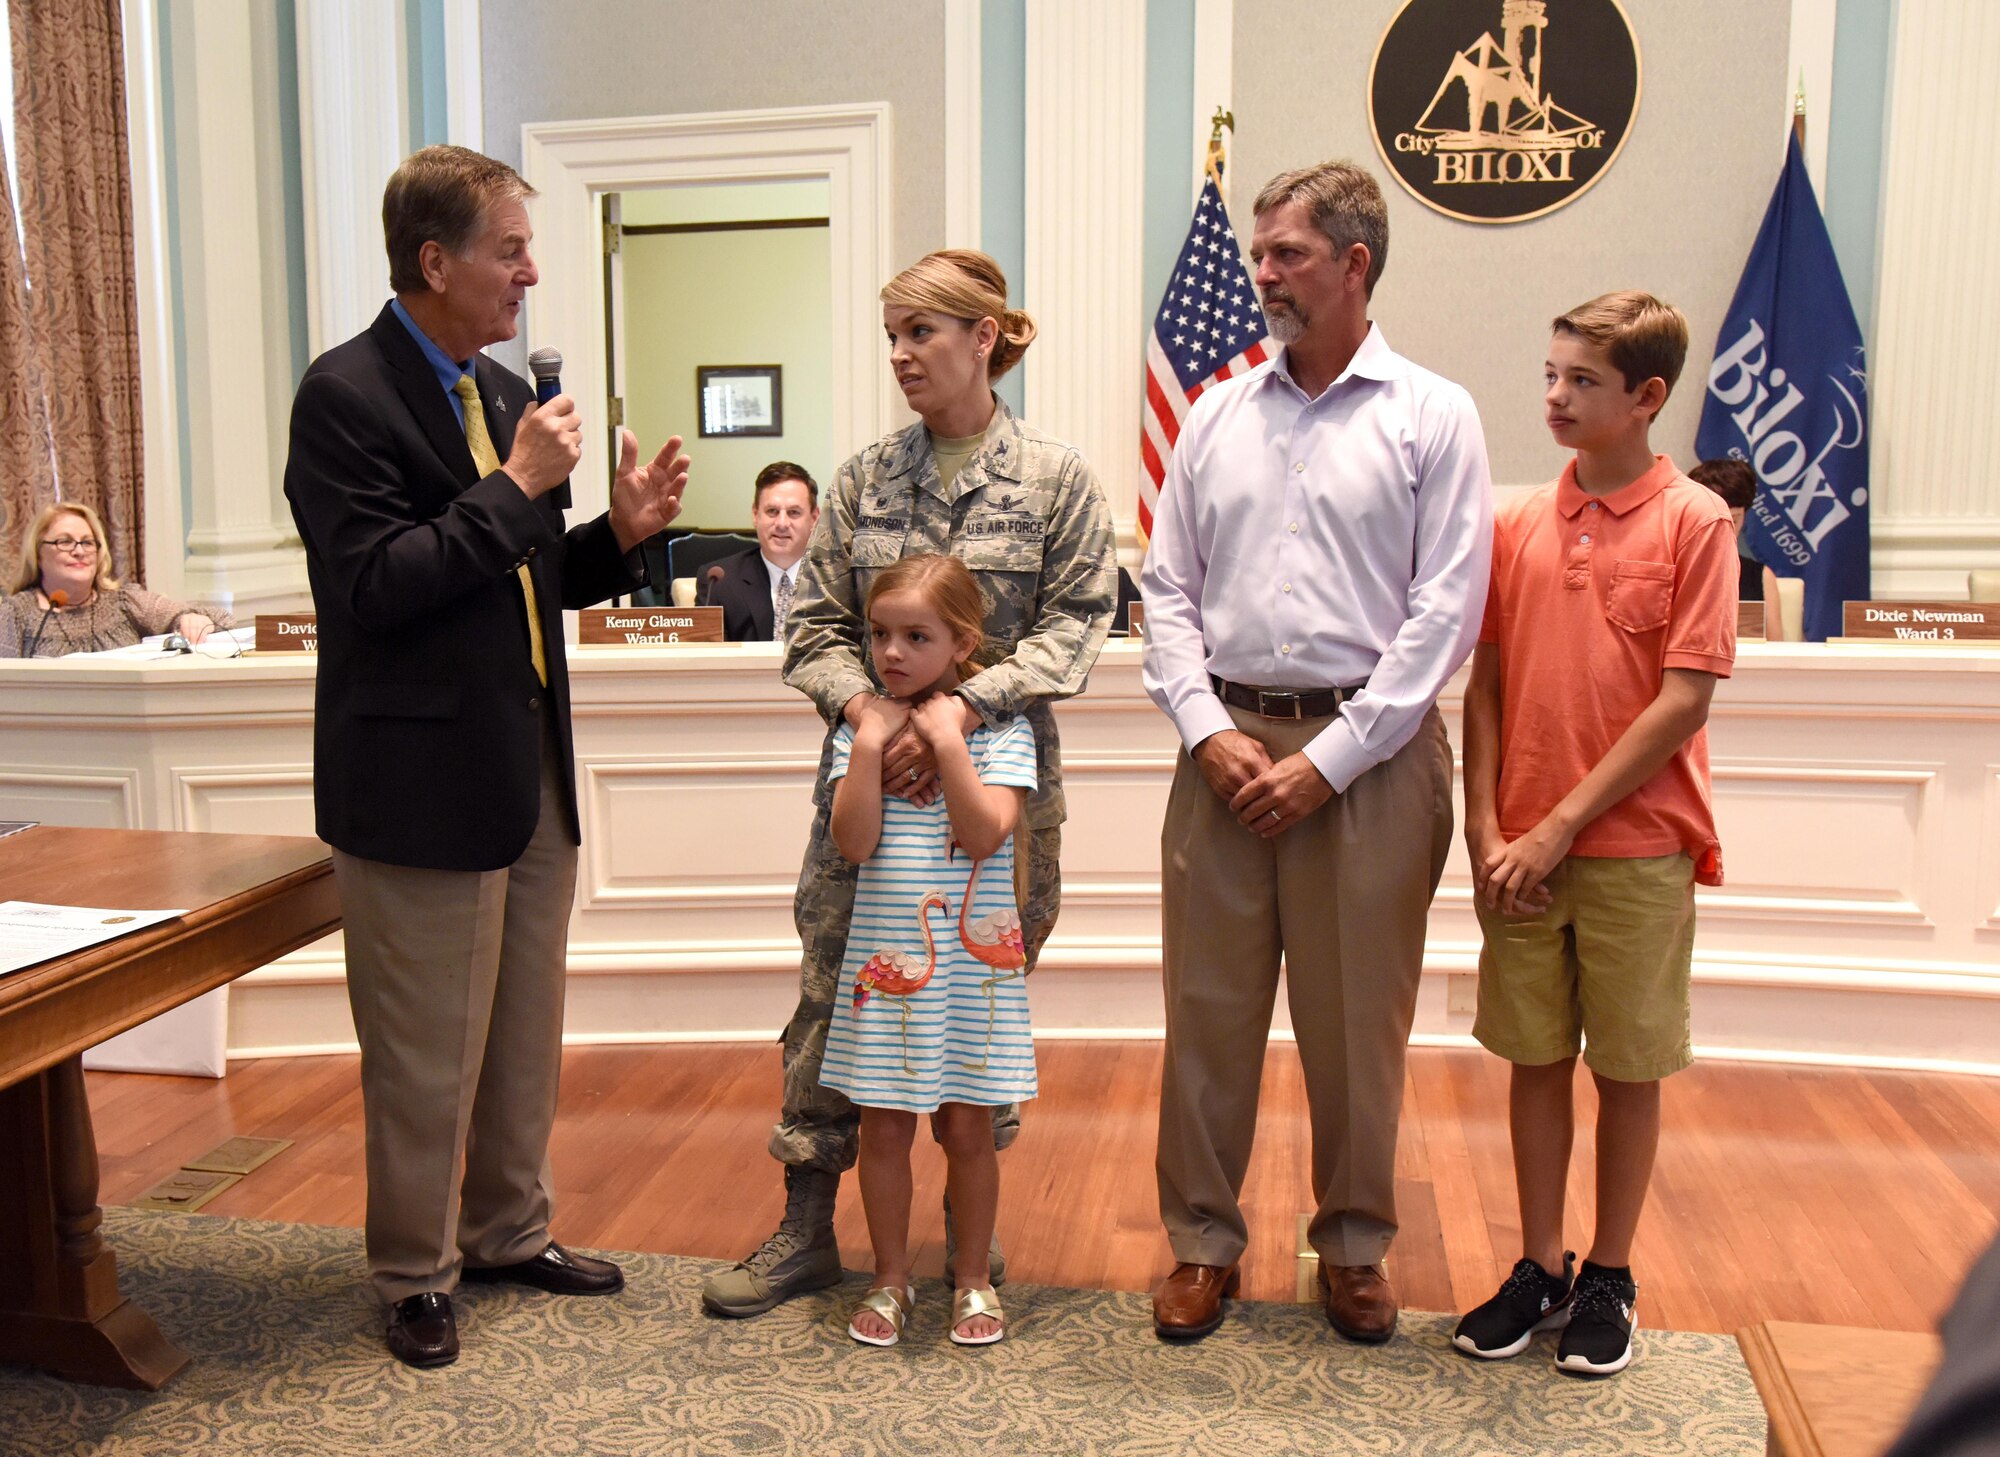 Biloxi Mayor Andrew “FoFo” Gilich, delivers remarks during a recognition ceremony for Col. Michele Edmondson, 81st Training Wing commander, at Biloxi City Hall May 30, 2017, in Biloxi, Miss. The mayor hosted the ceremony during a Biloxi city council meeting to recognize Edmondson and her family for their support to the city during her assignment at Keesler. (U.S. Air Force photo by Kemberly Groue)